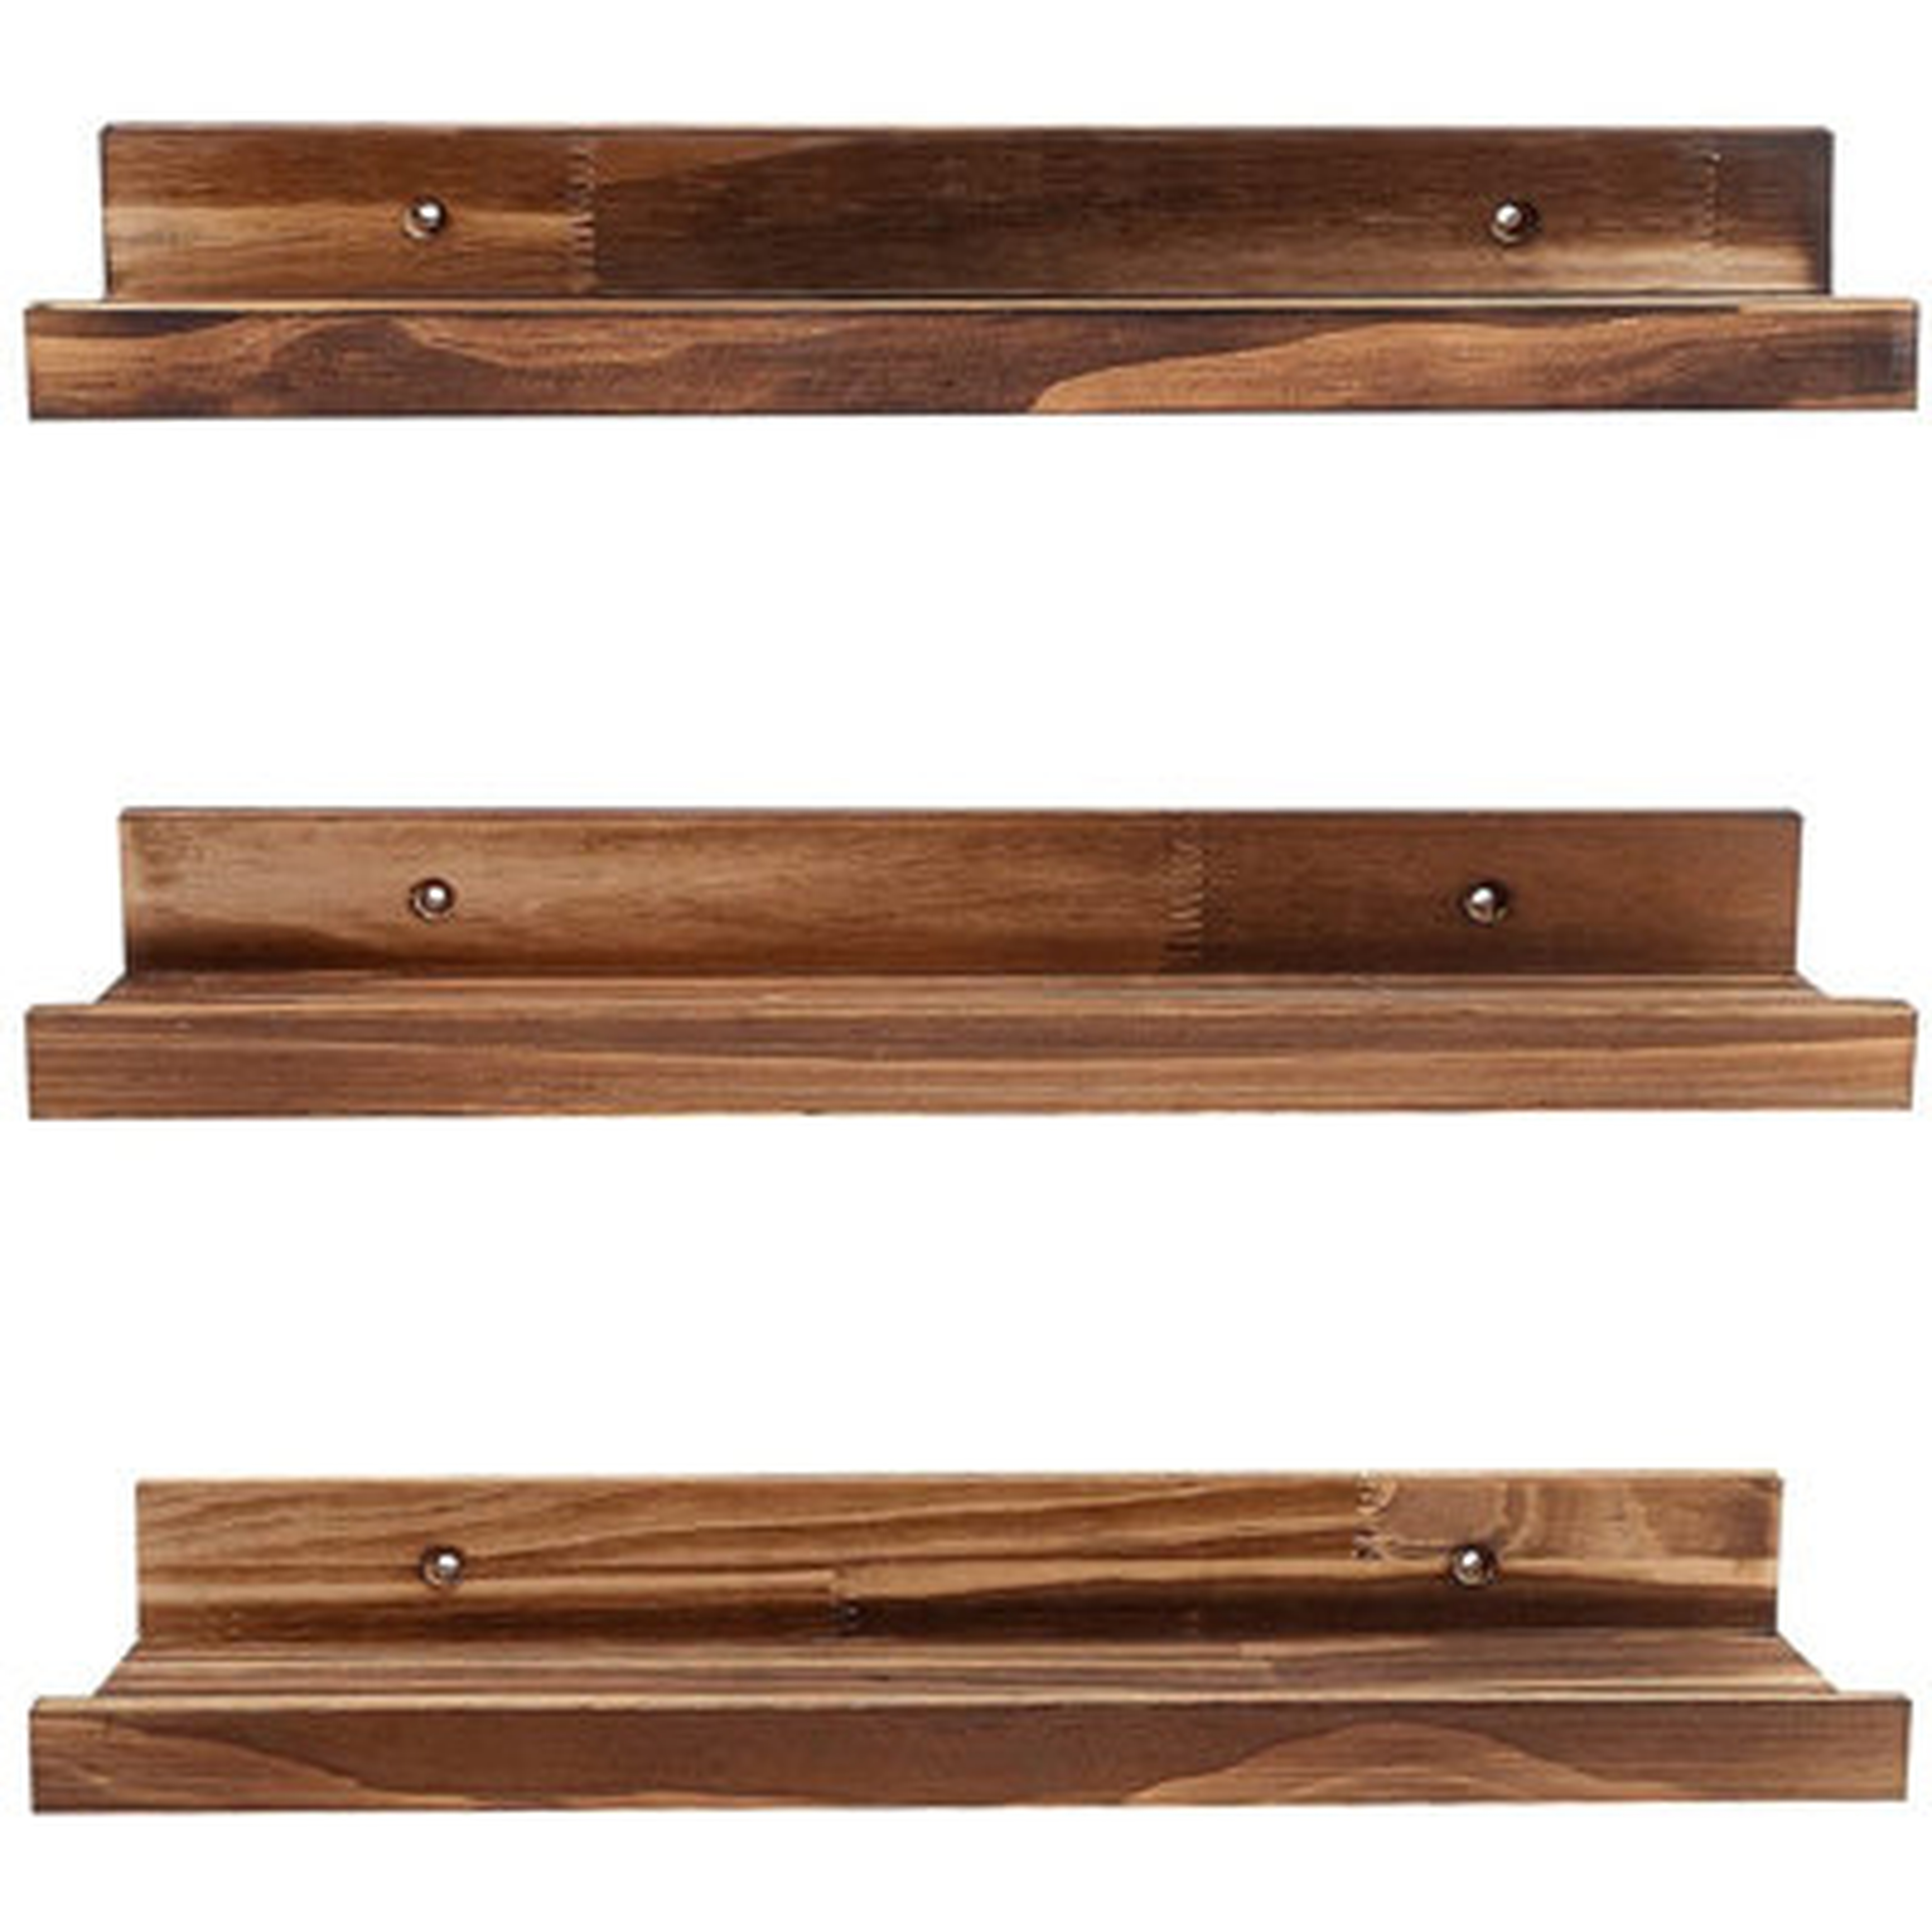 Rustic Wood Photo Shelf Picture Ledge Floating Wall Shelves, 16-Inch, Set Of 3 3 Different Sizes ,Picture Ledge Shelf Wood For Bedrooms,Office,Living Room, Kitchen - Wayfair